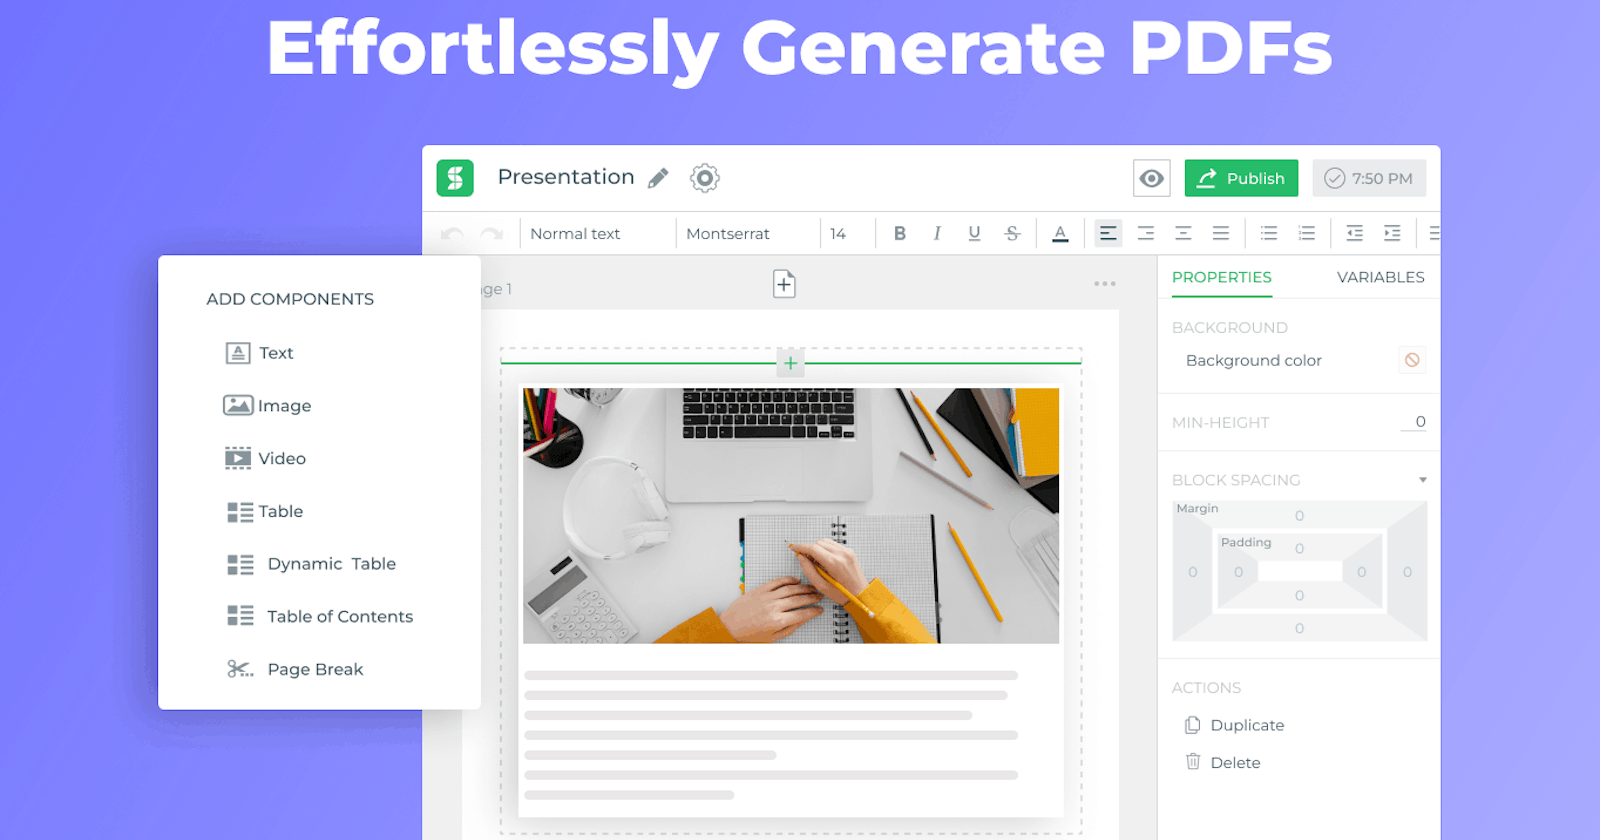 Design branded documents with DronaHQ's PDF creator